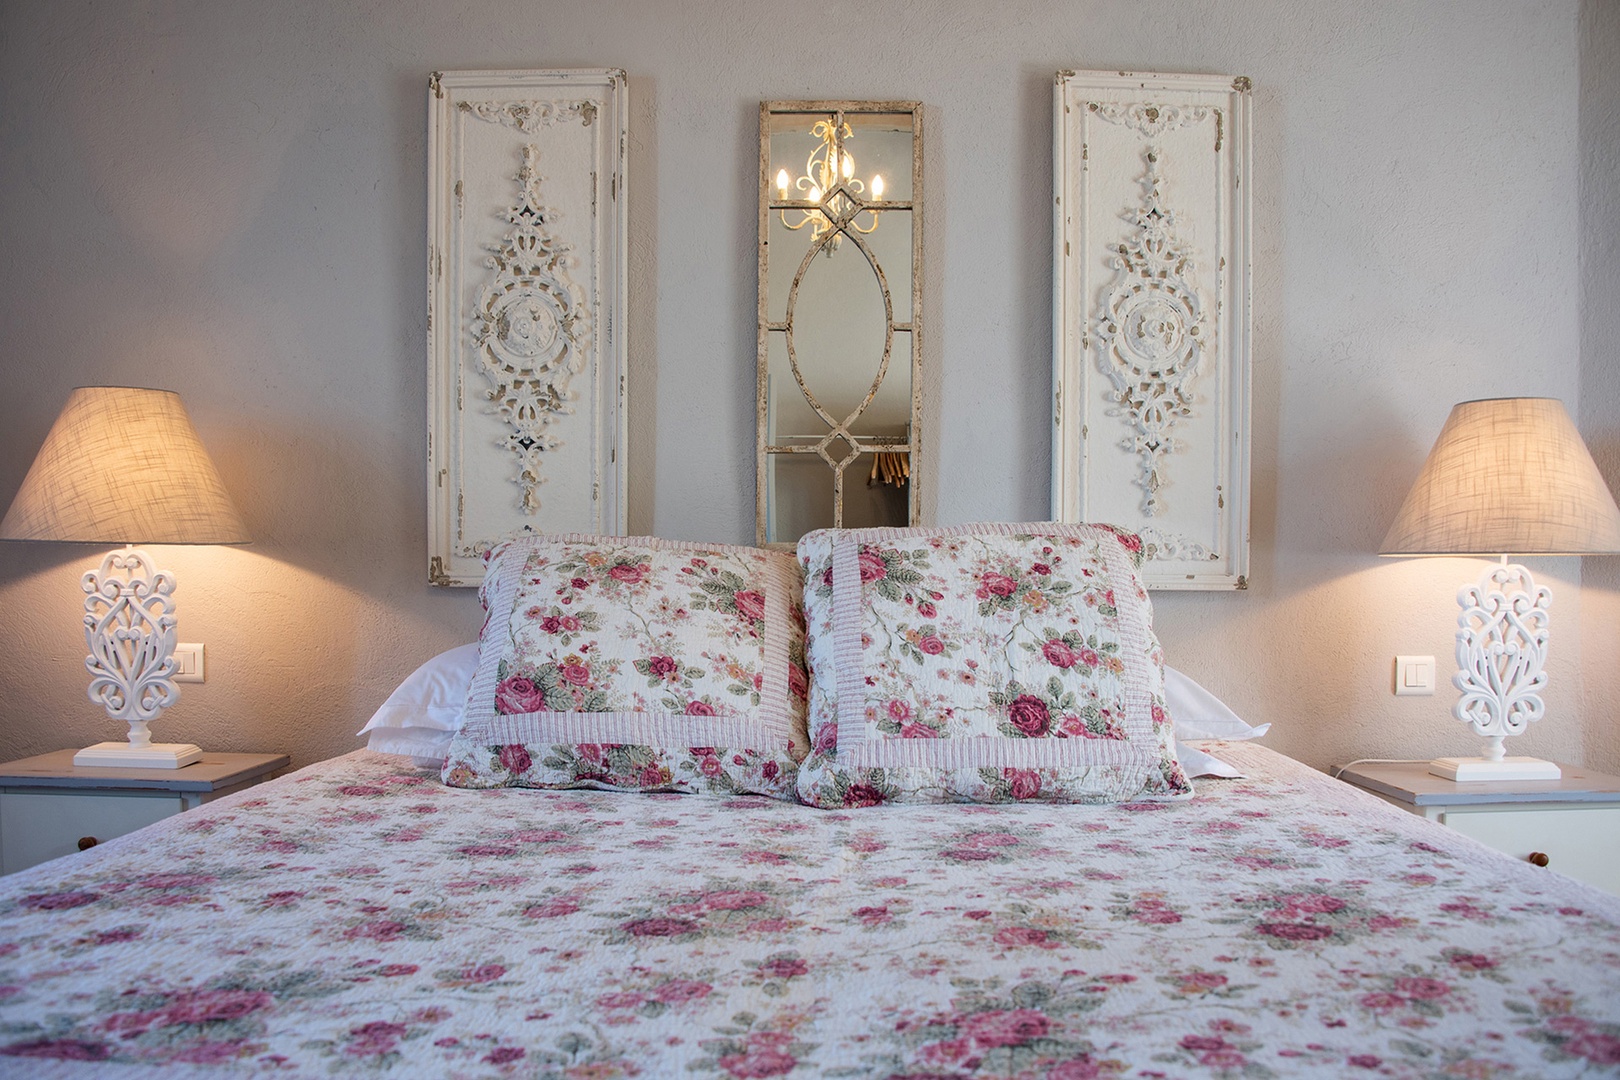 Provence country style in all the bedrooms.